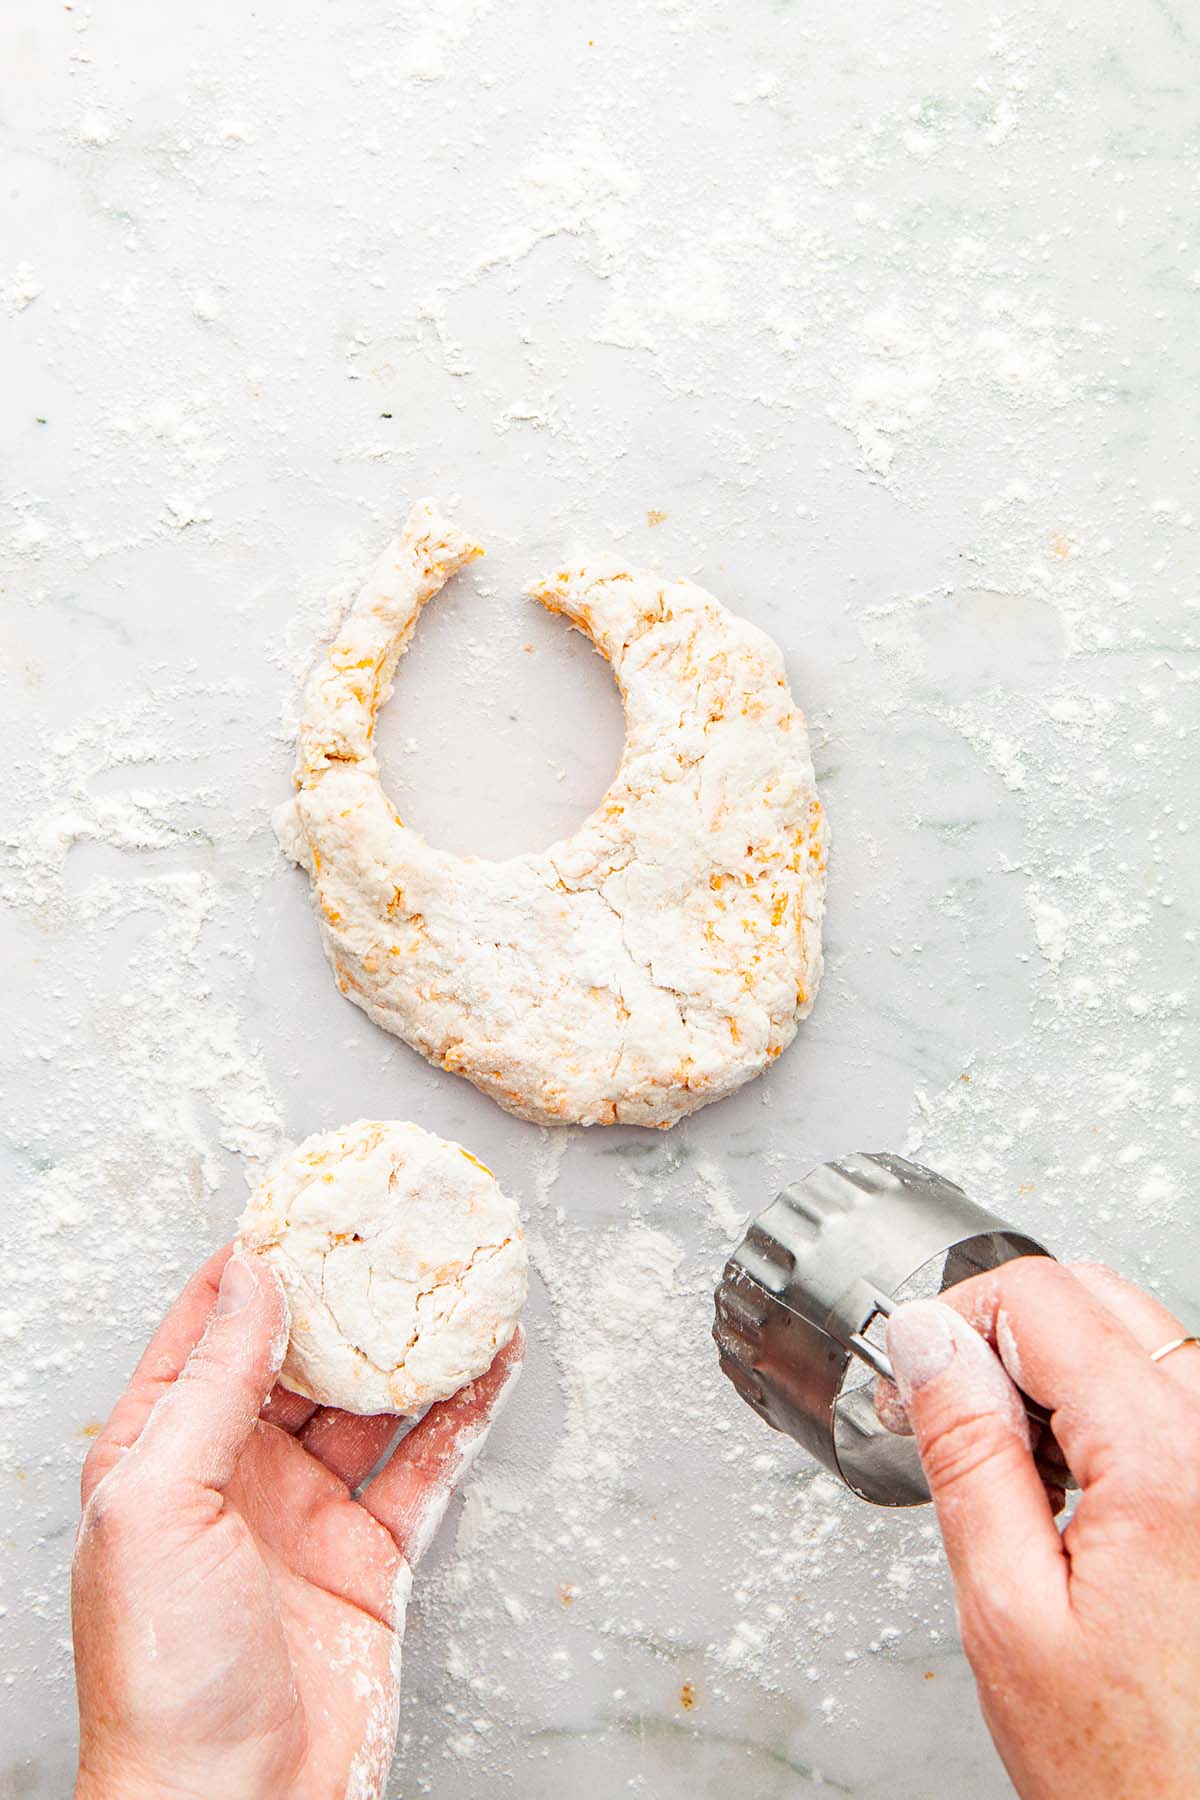 Hands holding a cut out biscuit and a biscuit cutter above rolled out dough on a marble surface.